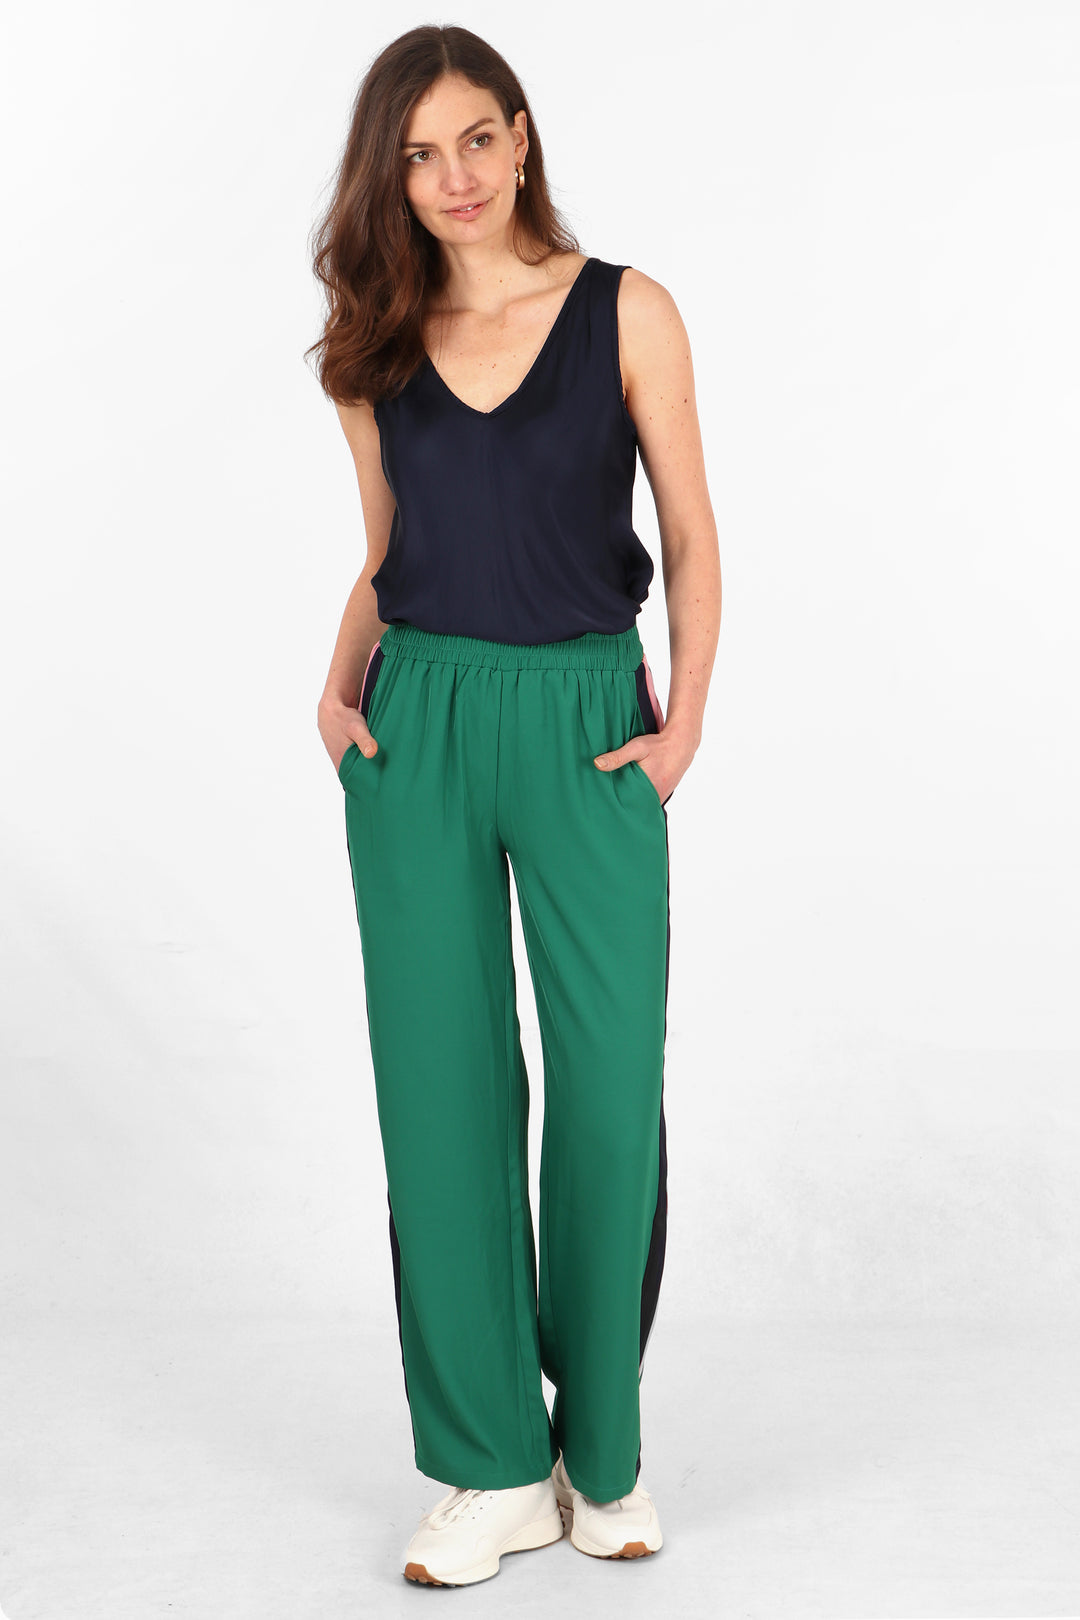 green casual long summer trousers with pockets and an elasticated waist